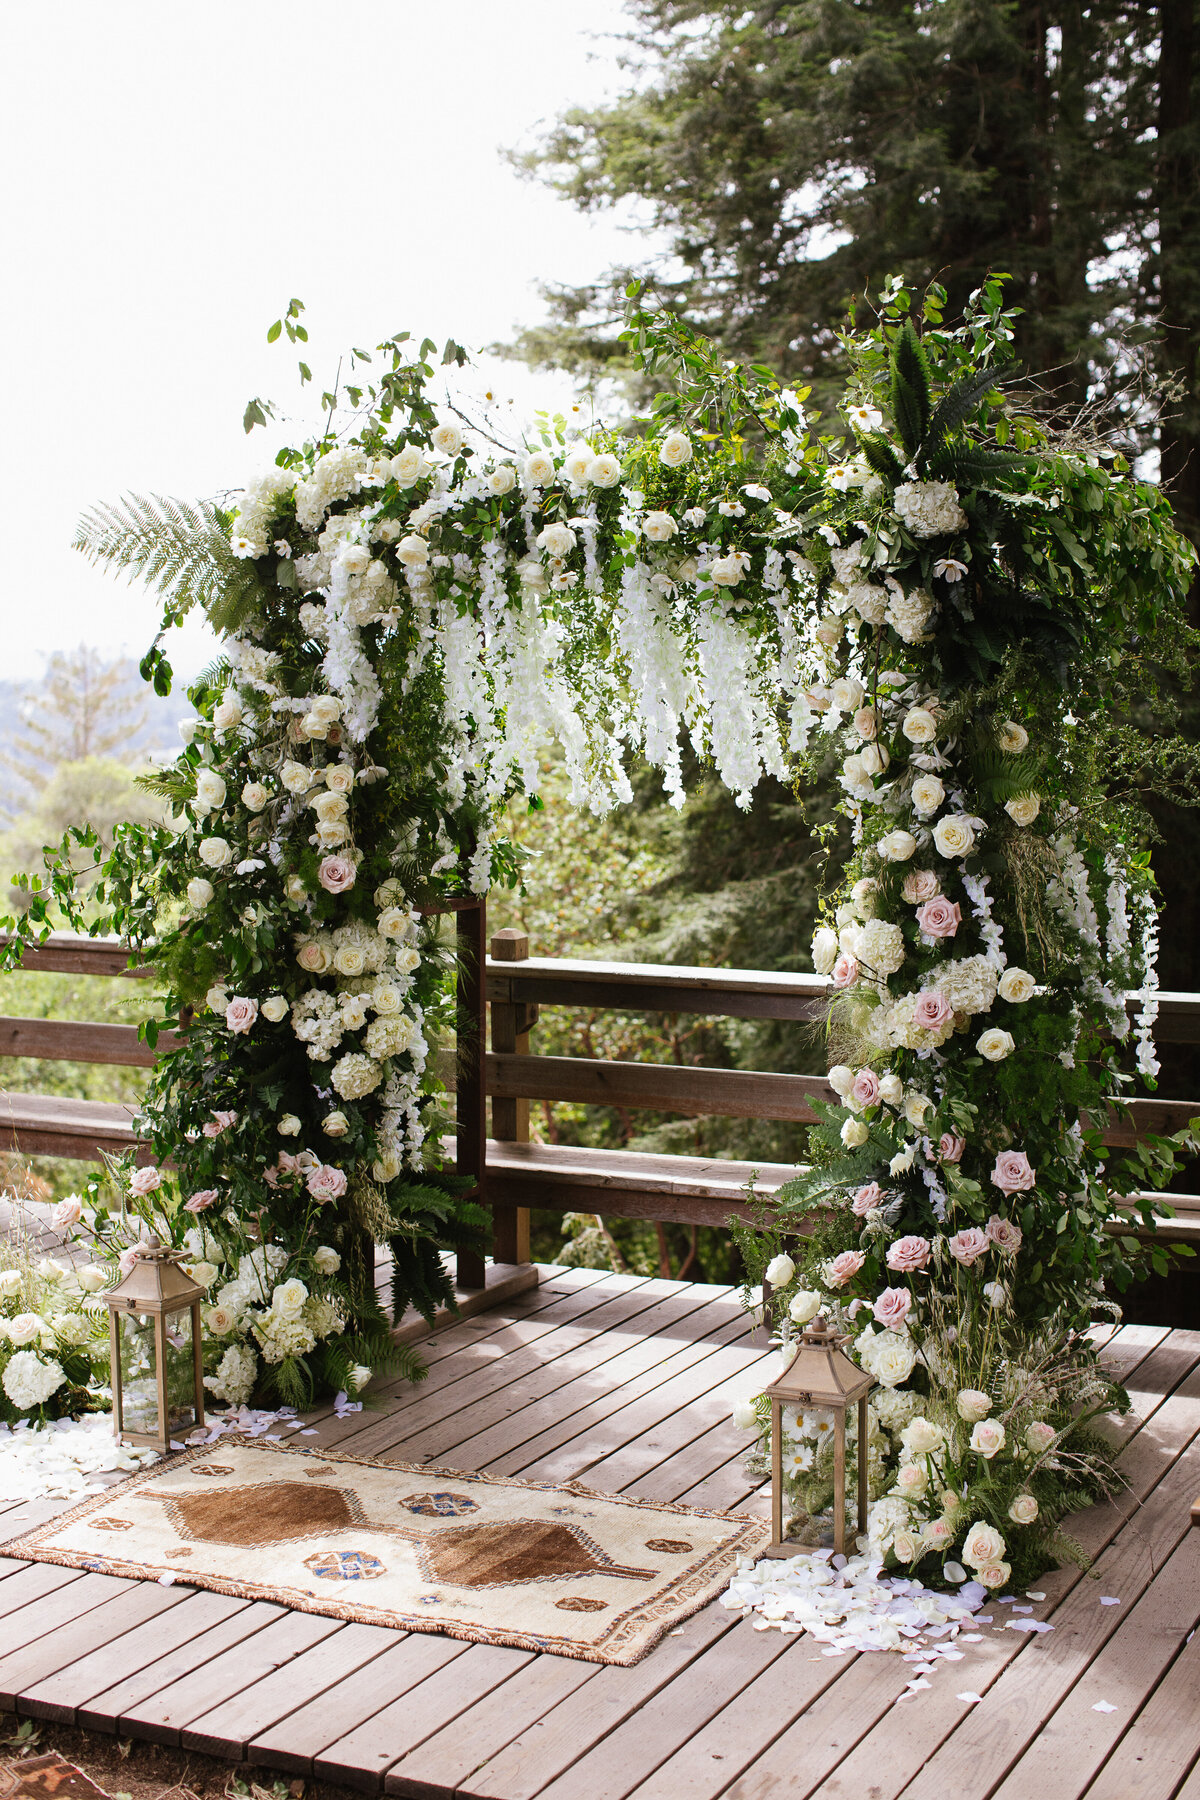 An Arch with White Flowers